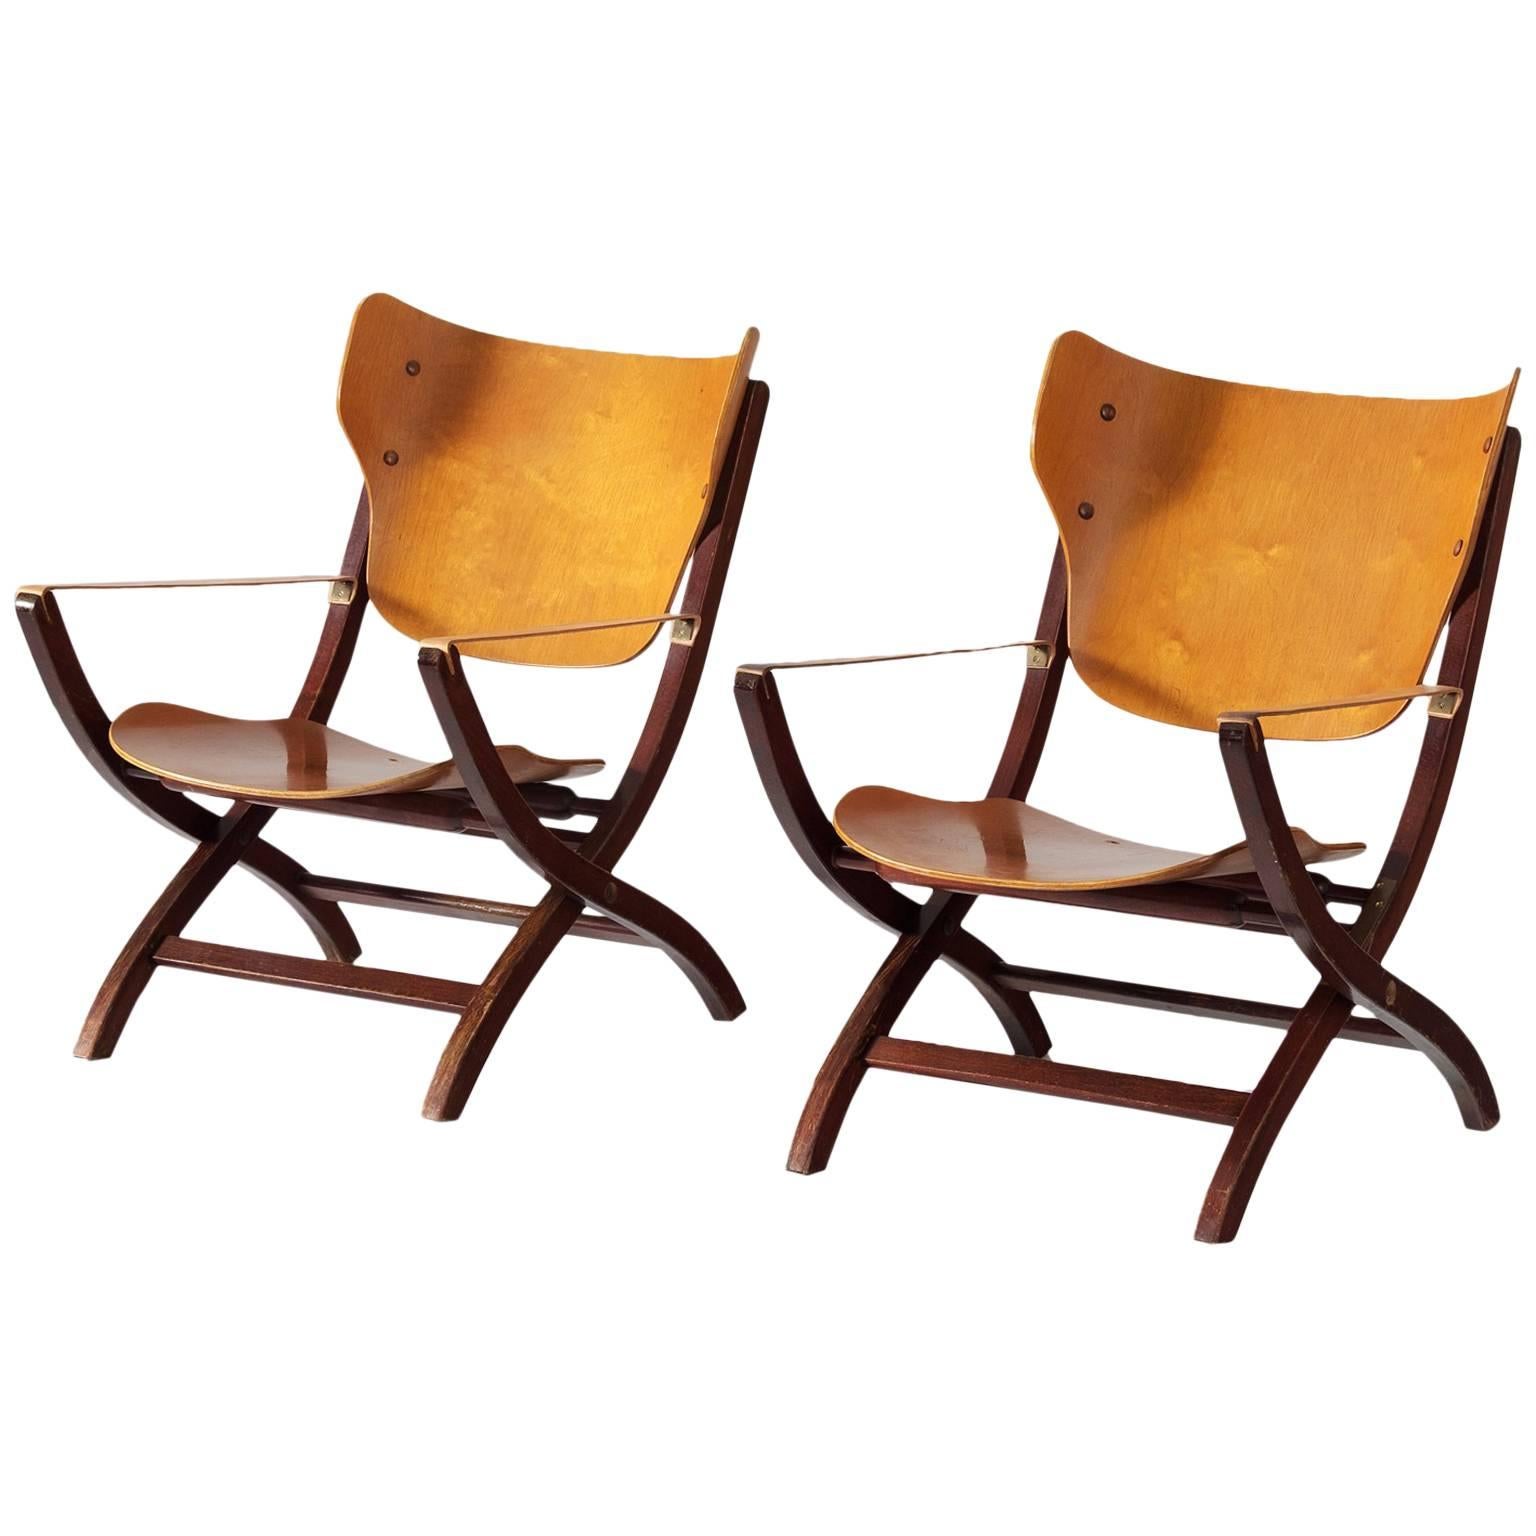 Poul Hundevad 'Egyptian' Chairs 